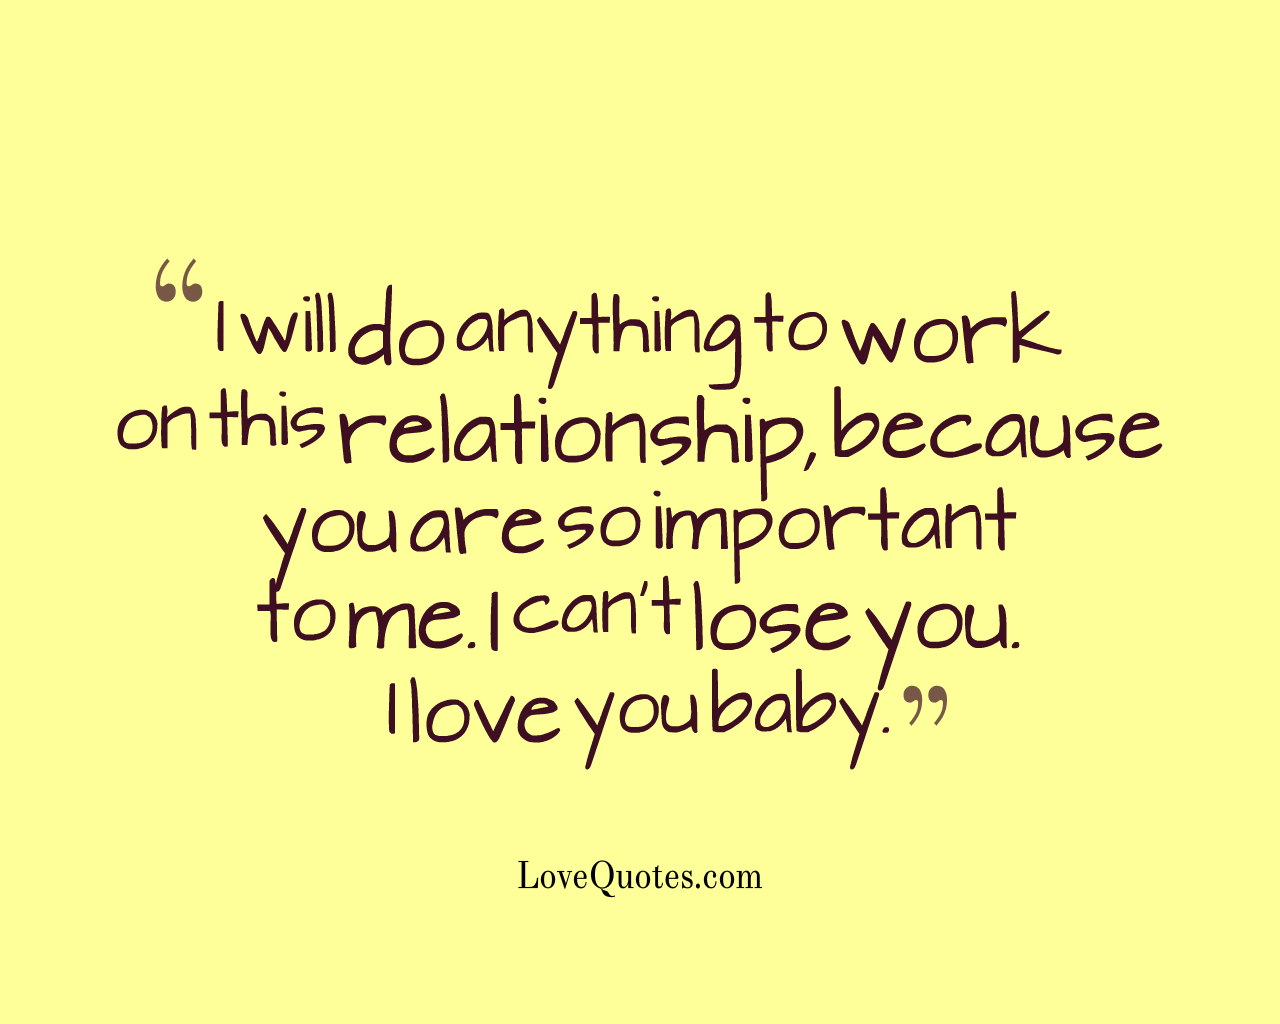 I Can't Lose You - Love Quotes